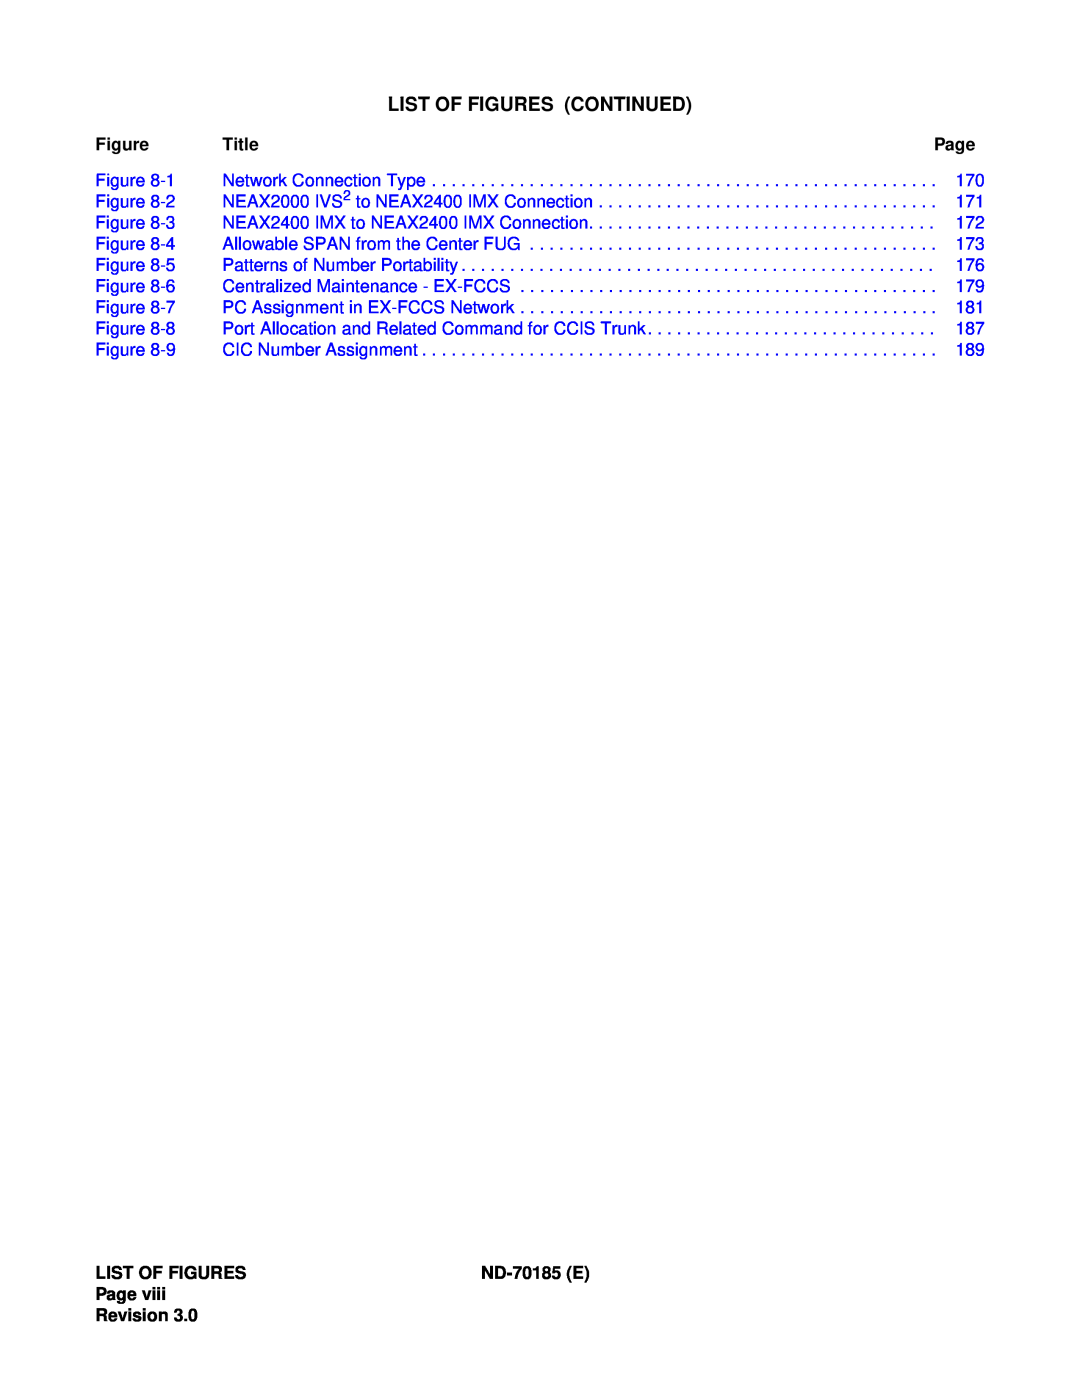 NEC NEAX2400 system manual List Of Figures Continued, Title, ND-70185E, Page Revision 